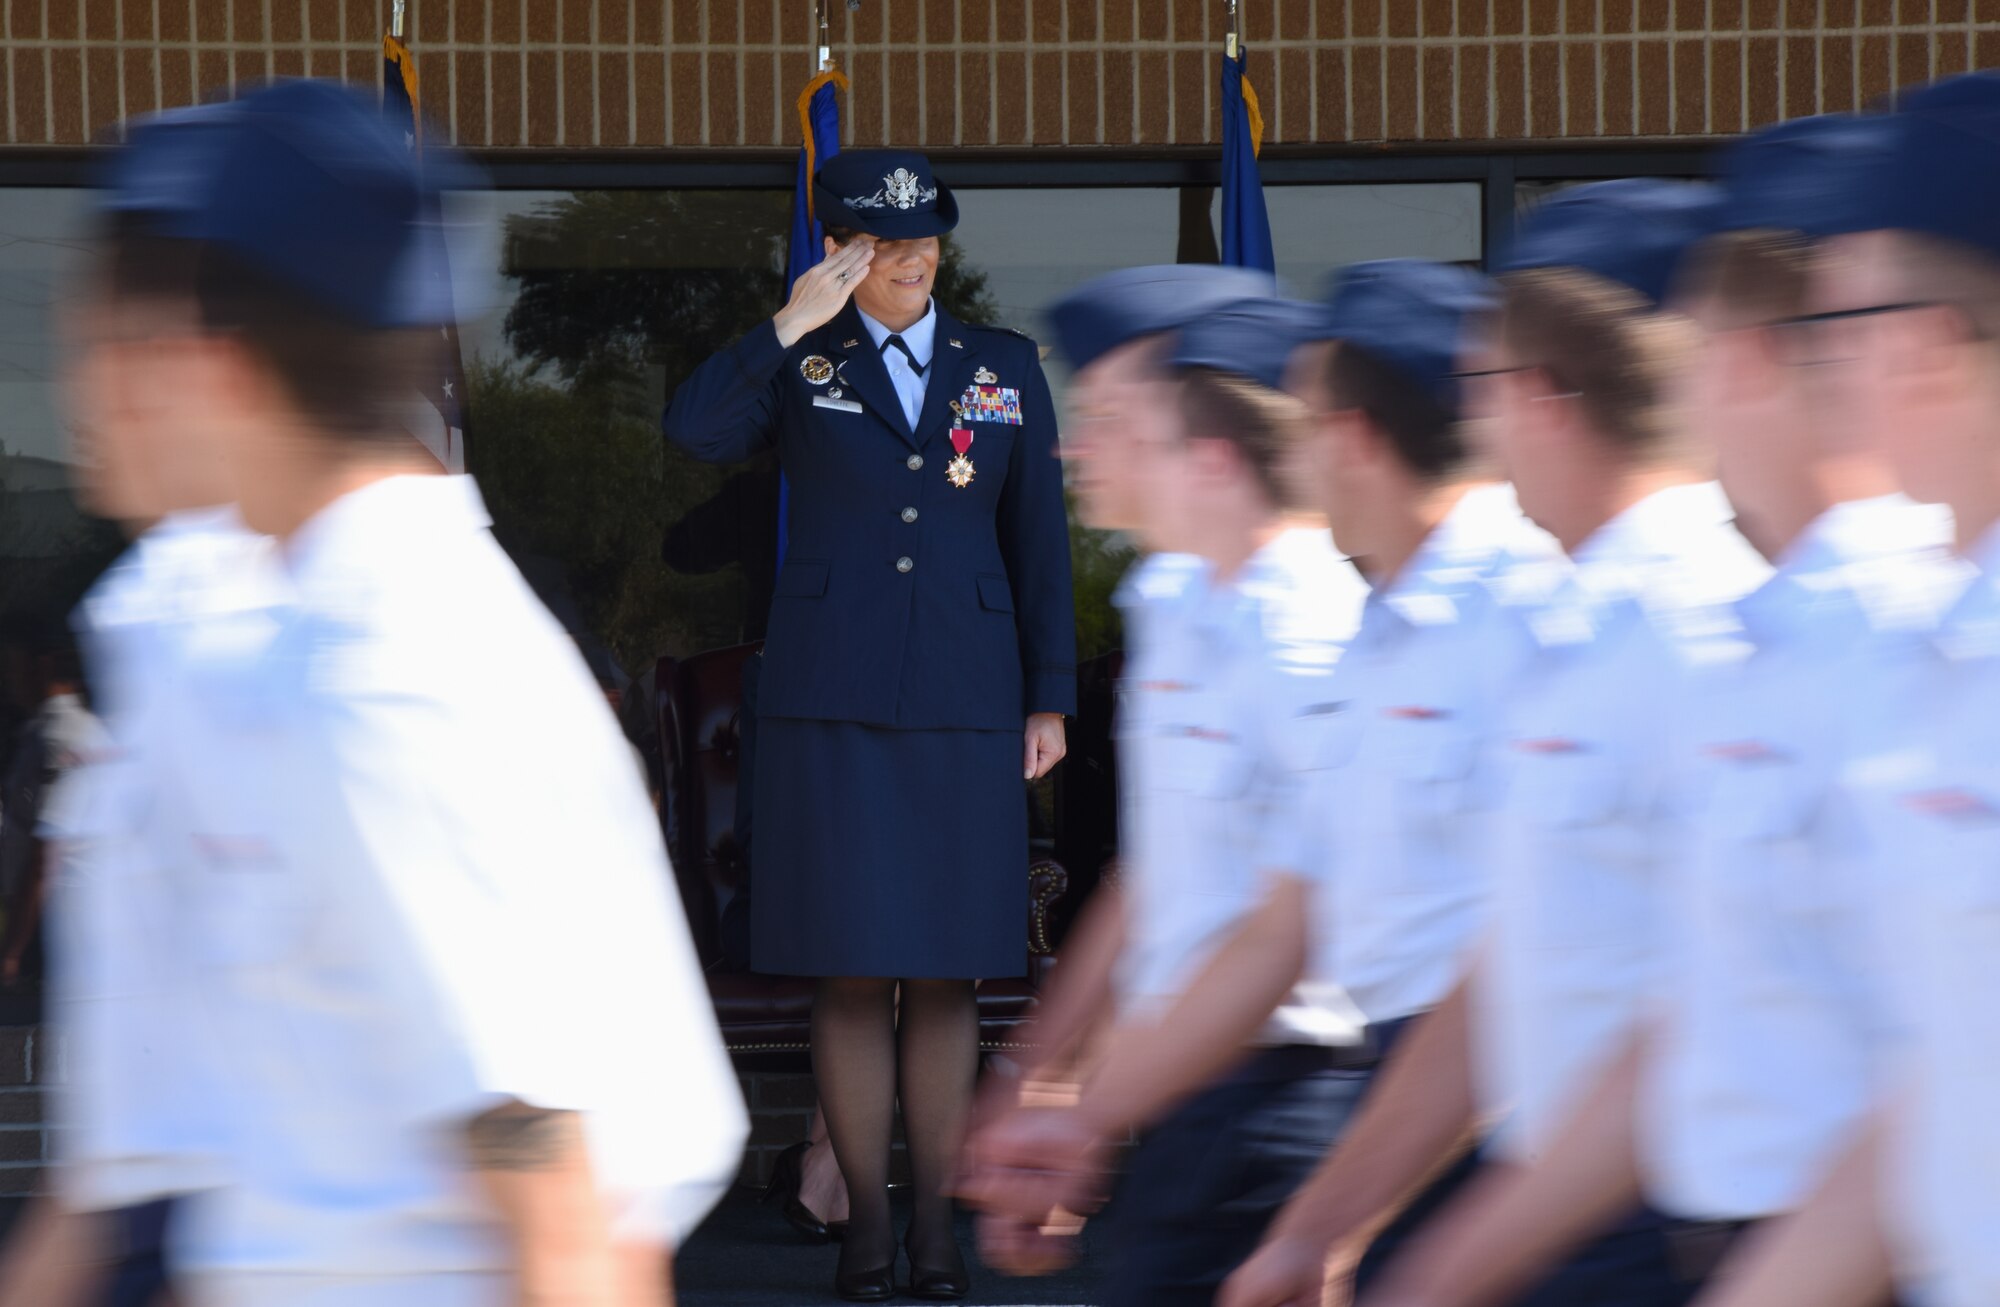 U.S. Air Force Col. Debra Lovette, outgoing 81st Training Wing commander, salutes Airmen as they march by during the change of command ceremony on the Levitow Training Support Facility drill pad at Keesler Air Force Base, Mississippi, May 16, 2019. The ceremony is a symbol of command being exchanged from one commander to the next by the handing-off of a ceremonial guidon. Lovette is now assigned to the U.S. Space Command. (U.S. Air Force photo by Kemberly Groue)